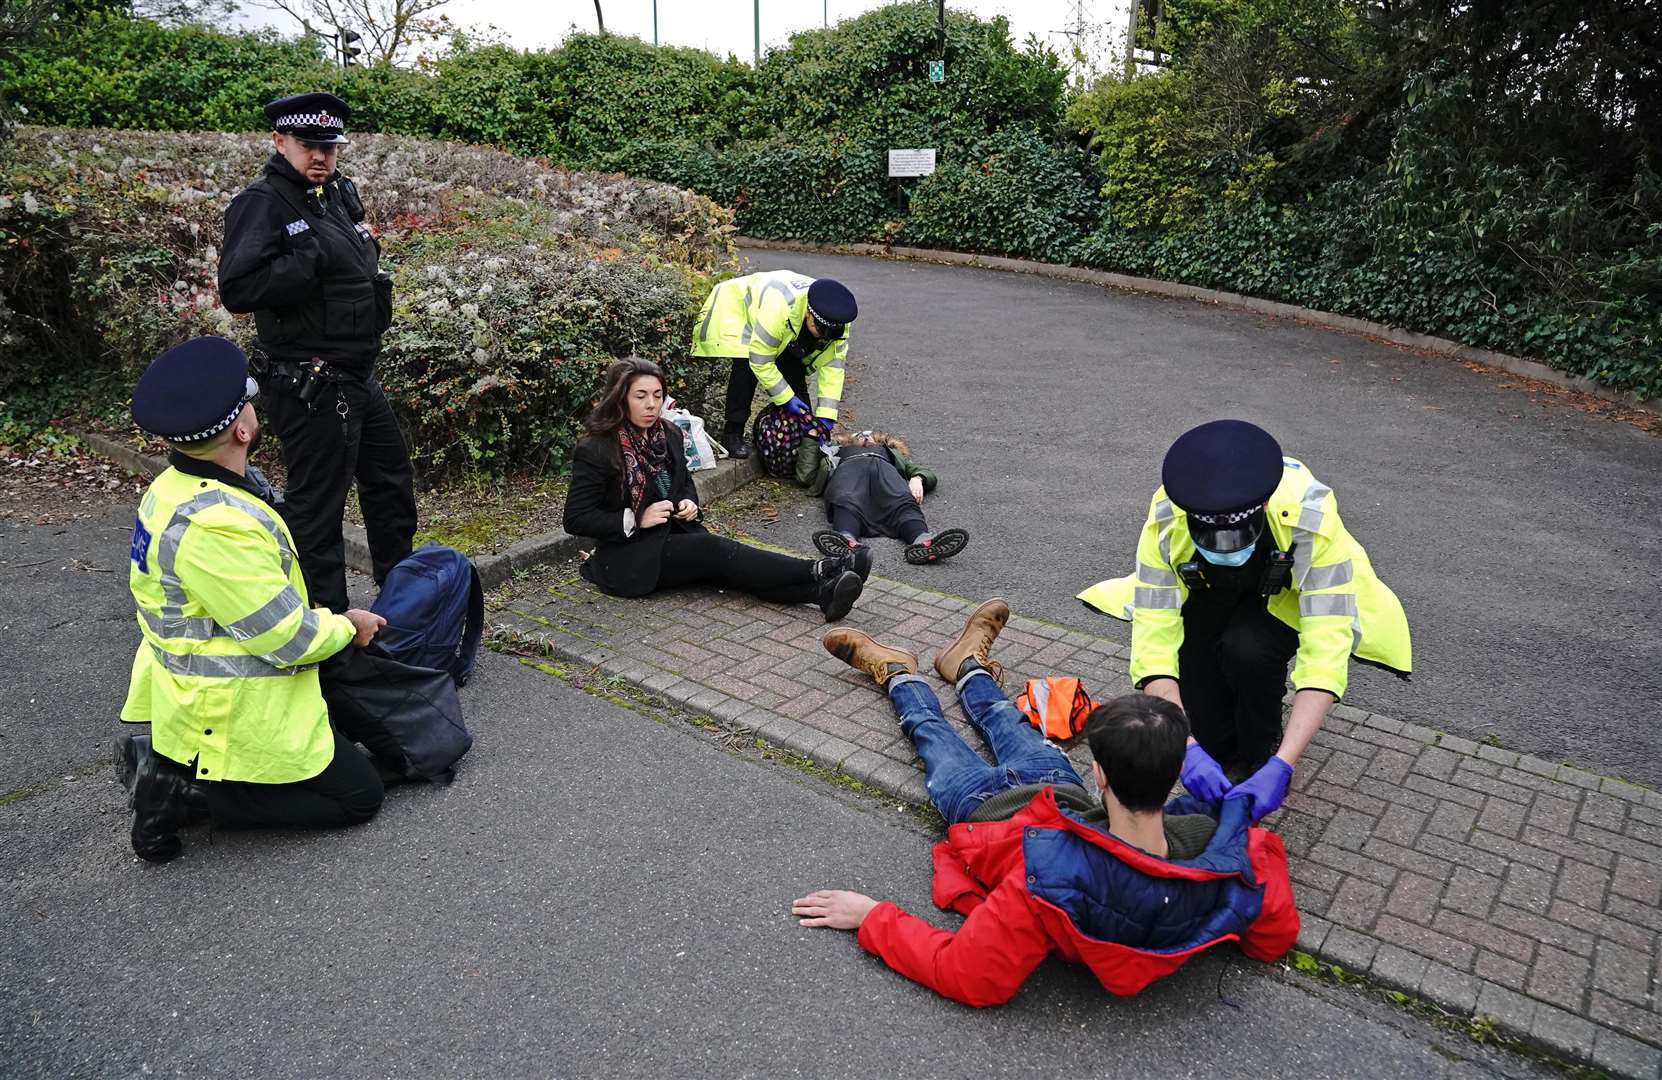 Protesters from Insulate Britain are arrested by police in the car park of the DoubleTree by Hilton at Dartford Crossing (Jonathan Brady/PA)